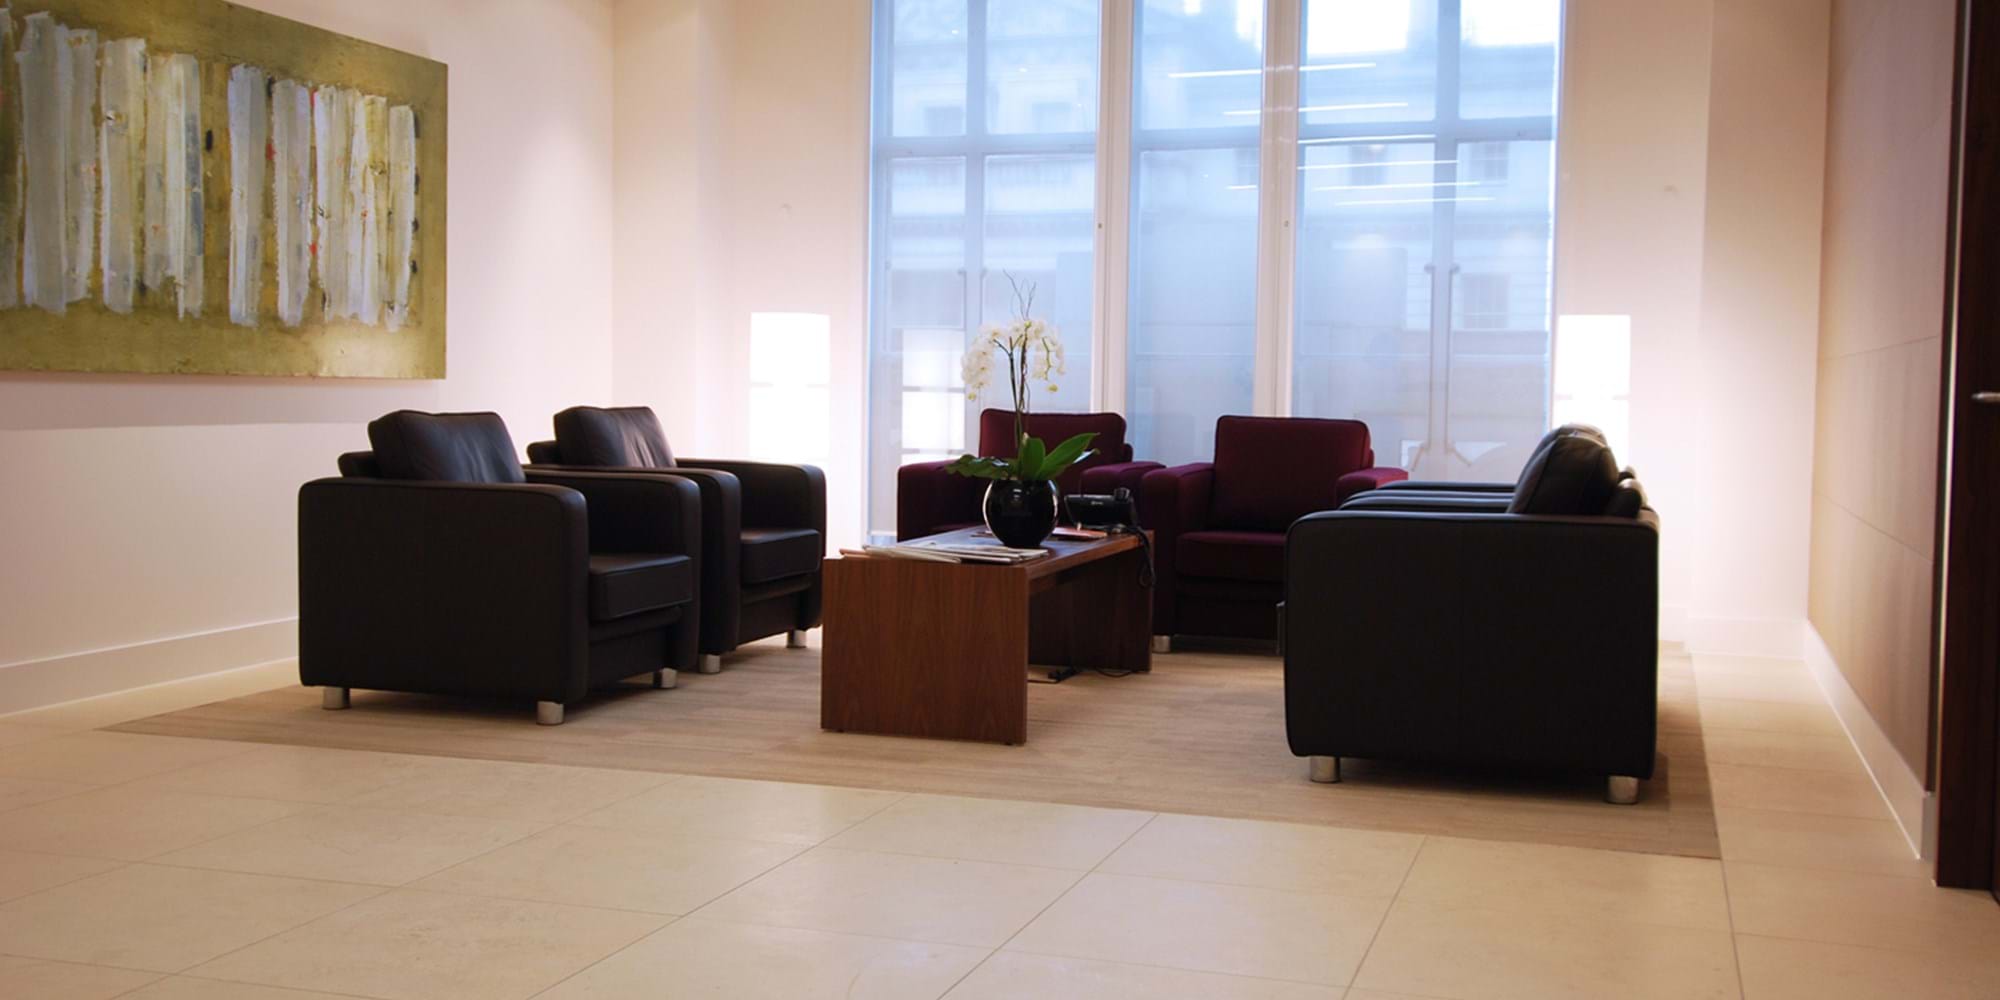 Modus Workspace office design, fit out and refurbishment - ECI - Breakout - Reception Area ECI.jpg